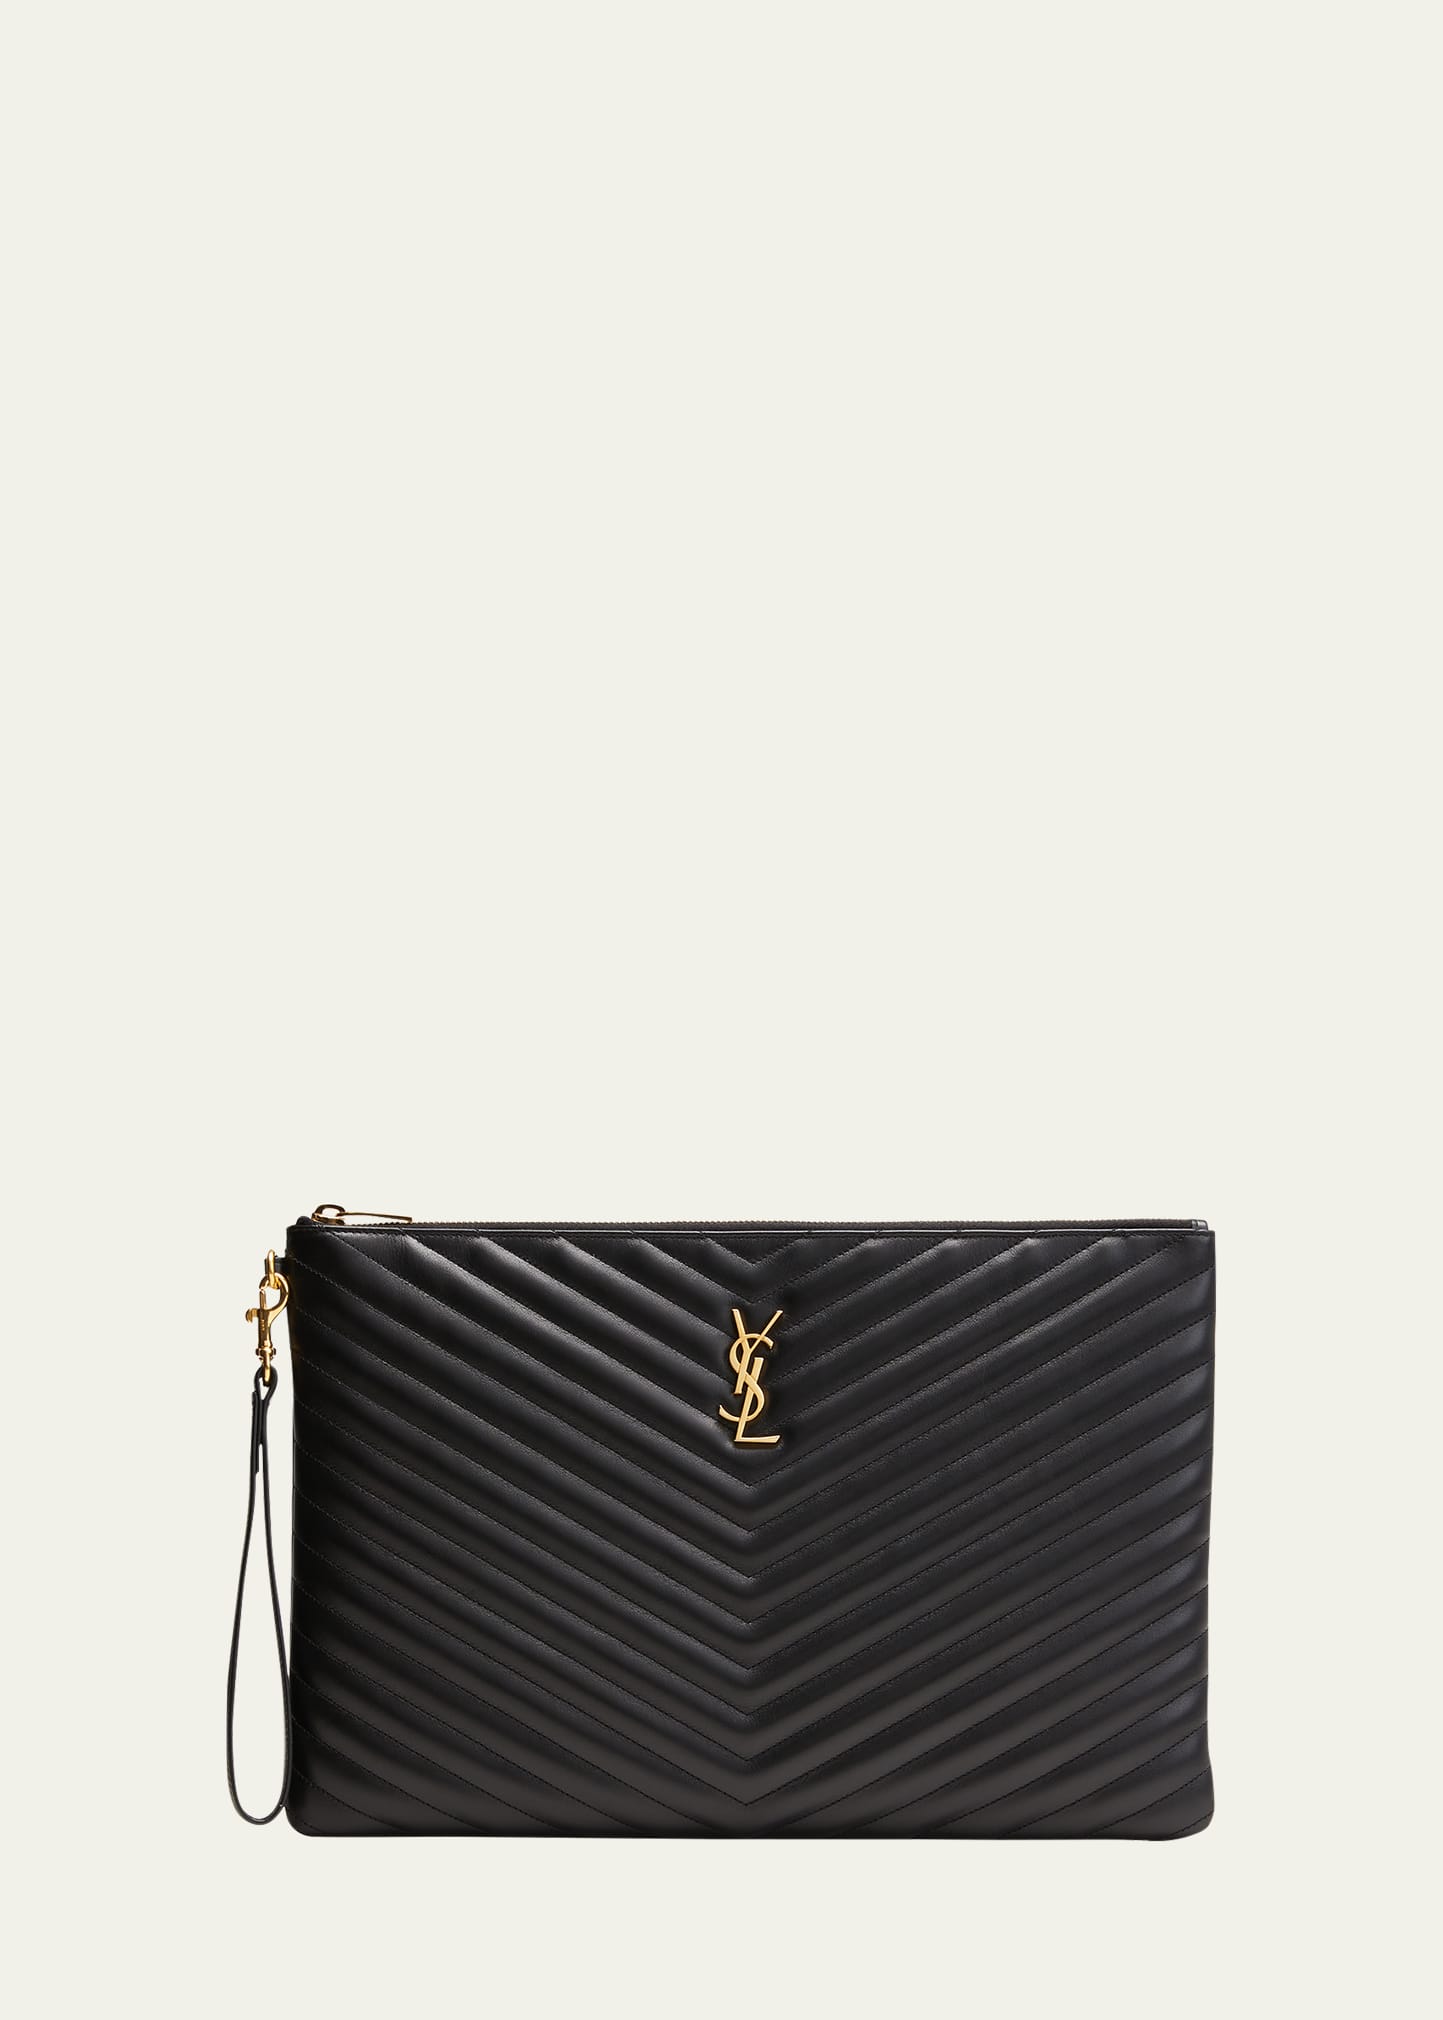 YSL Monogram Large Pouch in Smooth Leather